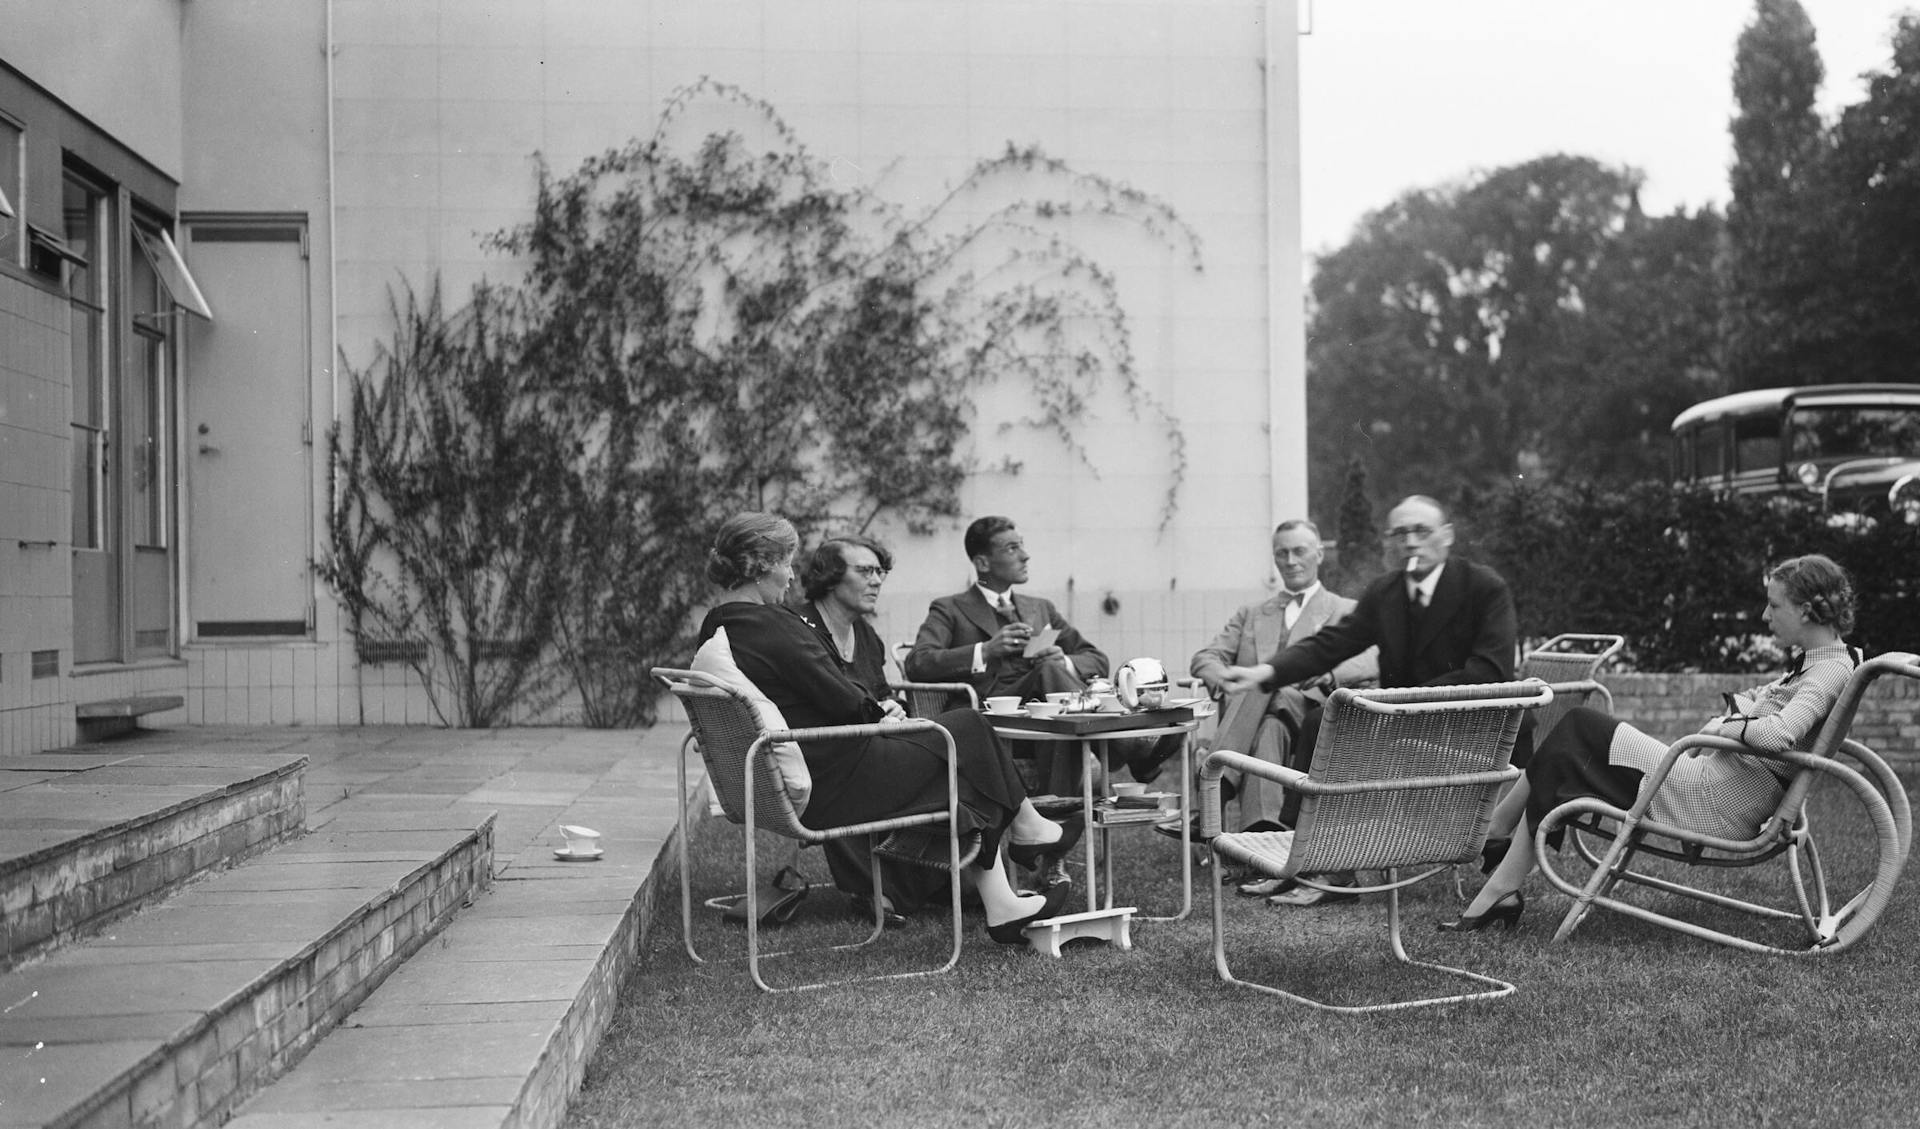 Sonneveld family and guests in the backyard of Sonneveld House, designed by J.A. Brinkman & L.C. van der Vlugt, in collaboration with landscape architect Murk Leverland, ca. 1938. Collection Het Nieuwe Instituut, loan Stichting Behoud Interieur… 